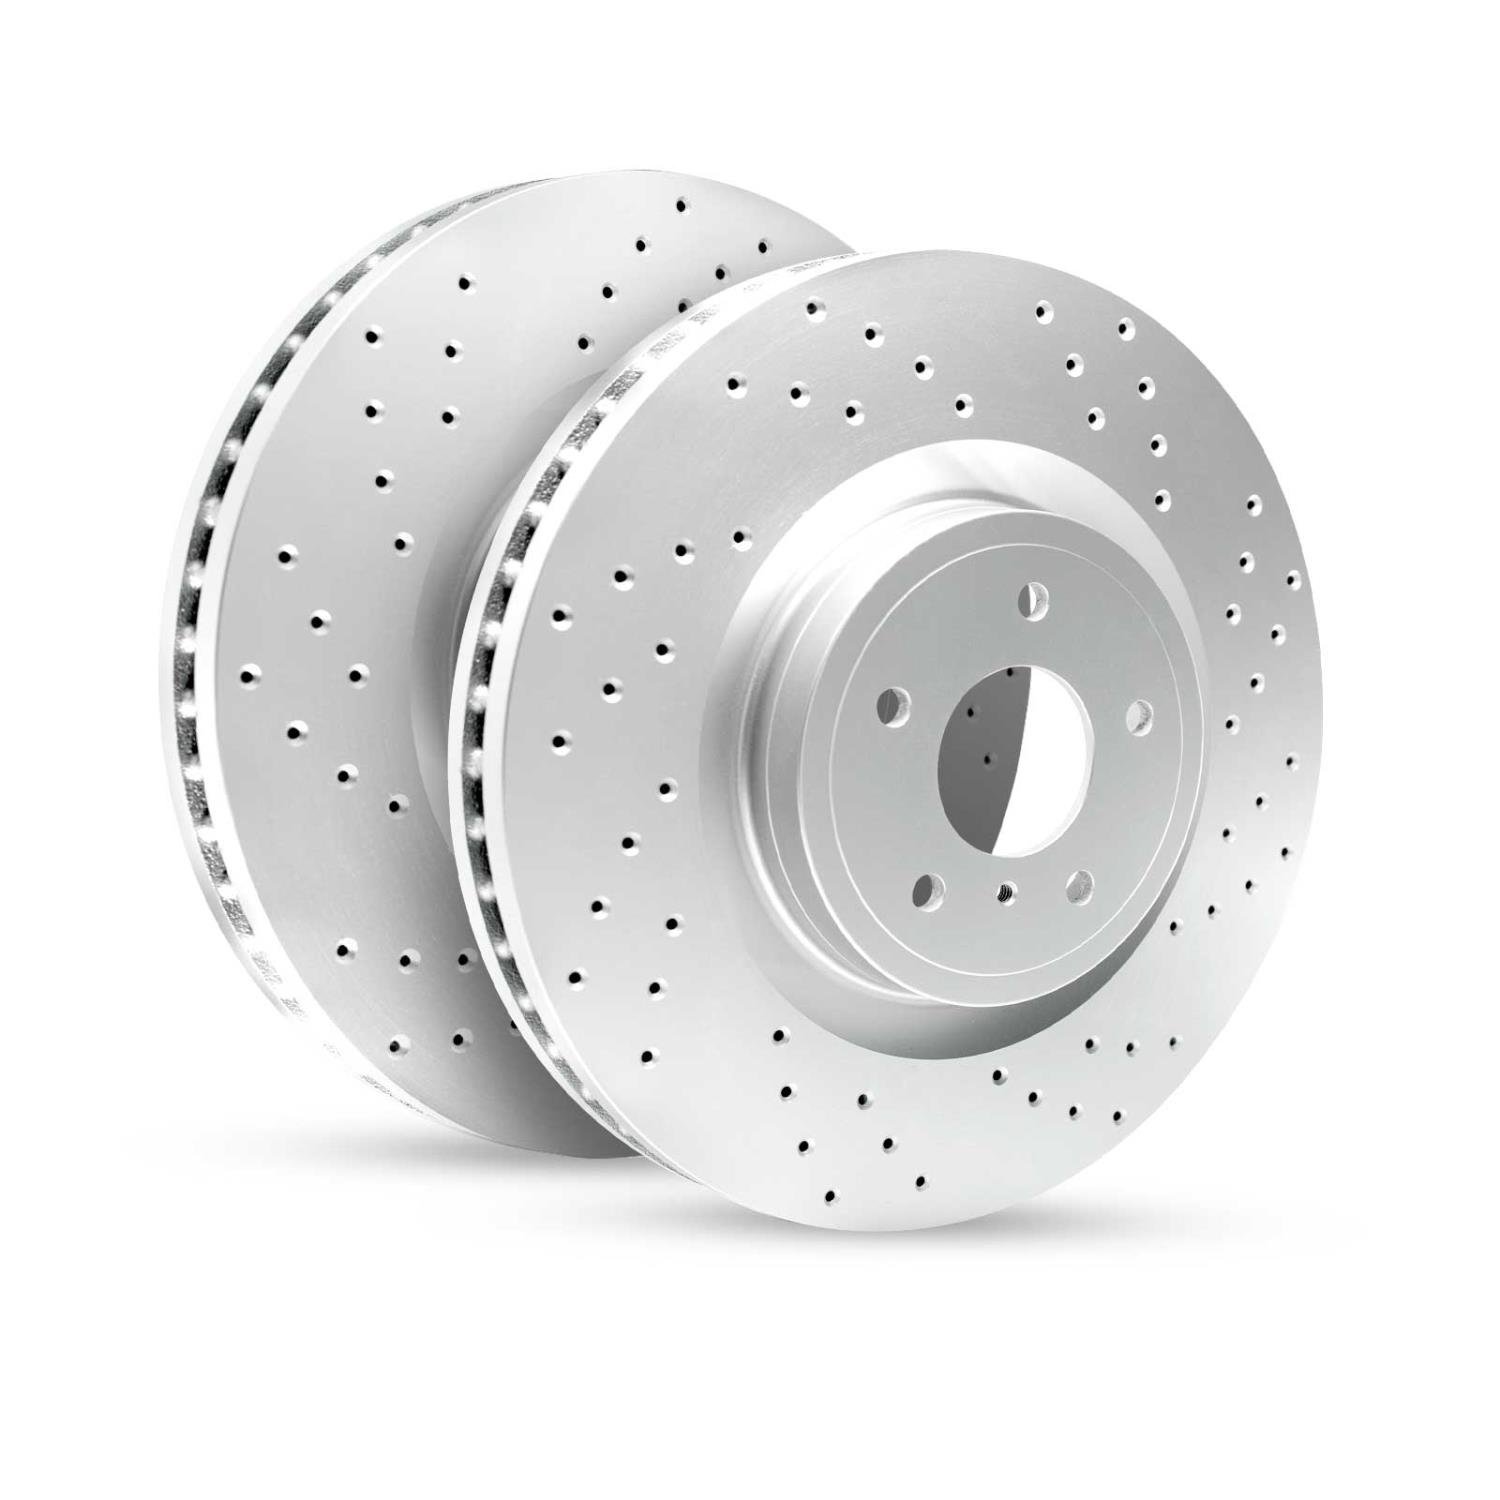 GEO-Carbon Drilled/Slotted Rotors, 2001-2008 Acura/Honda,